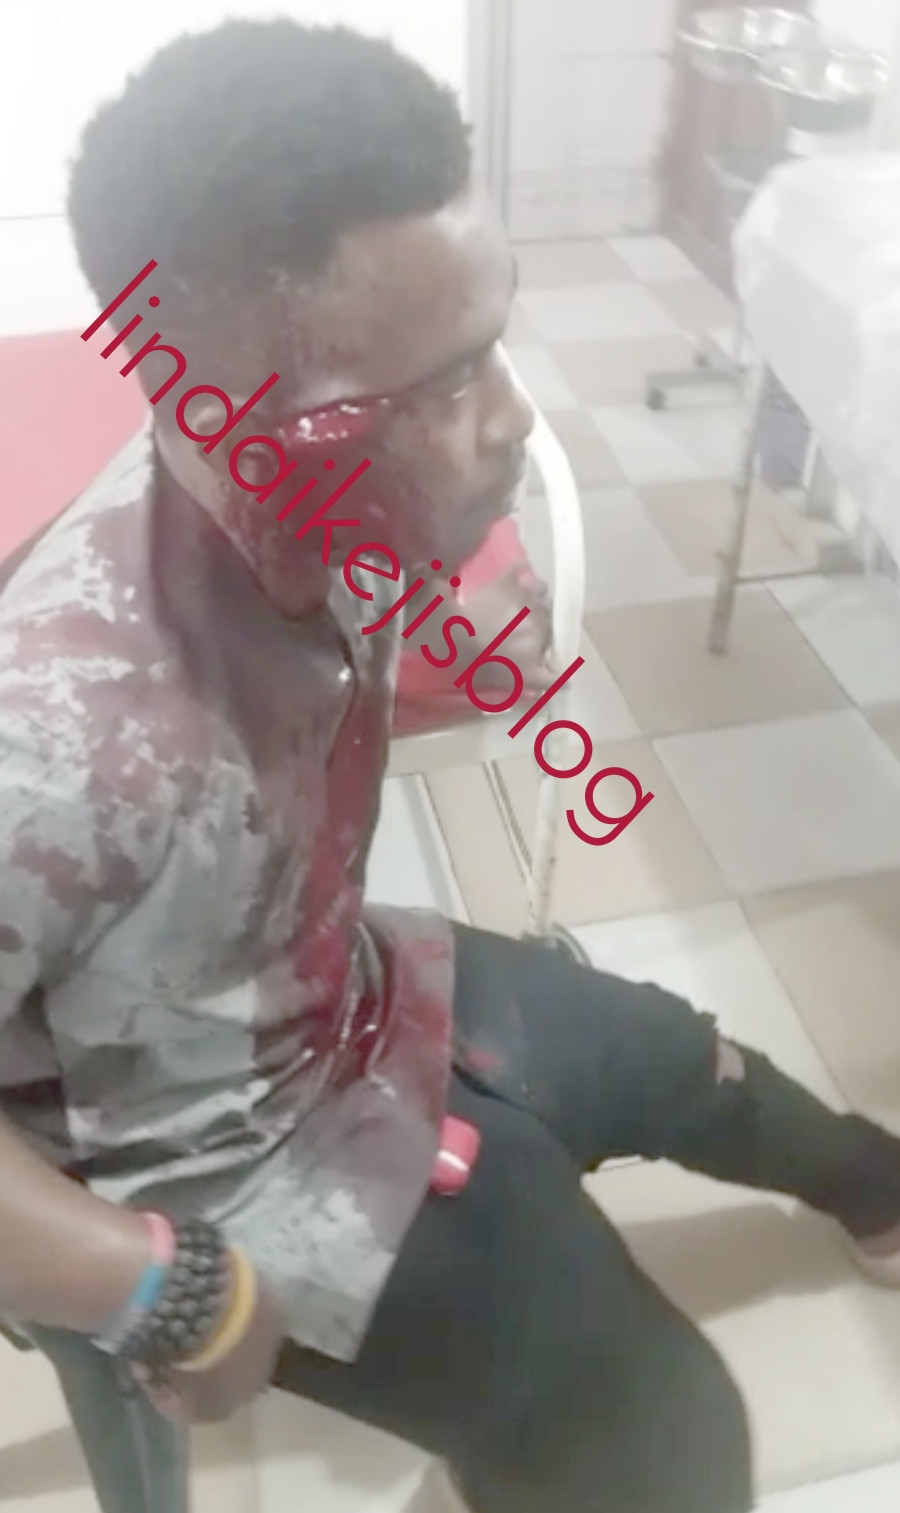 Car Snatchers Arrested After Stabbing Uber Driver And Stealing His Car In Lagos [Photos/Video] 2